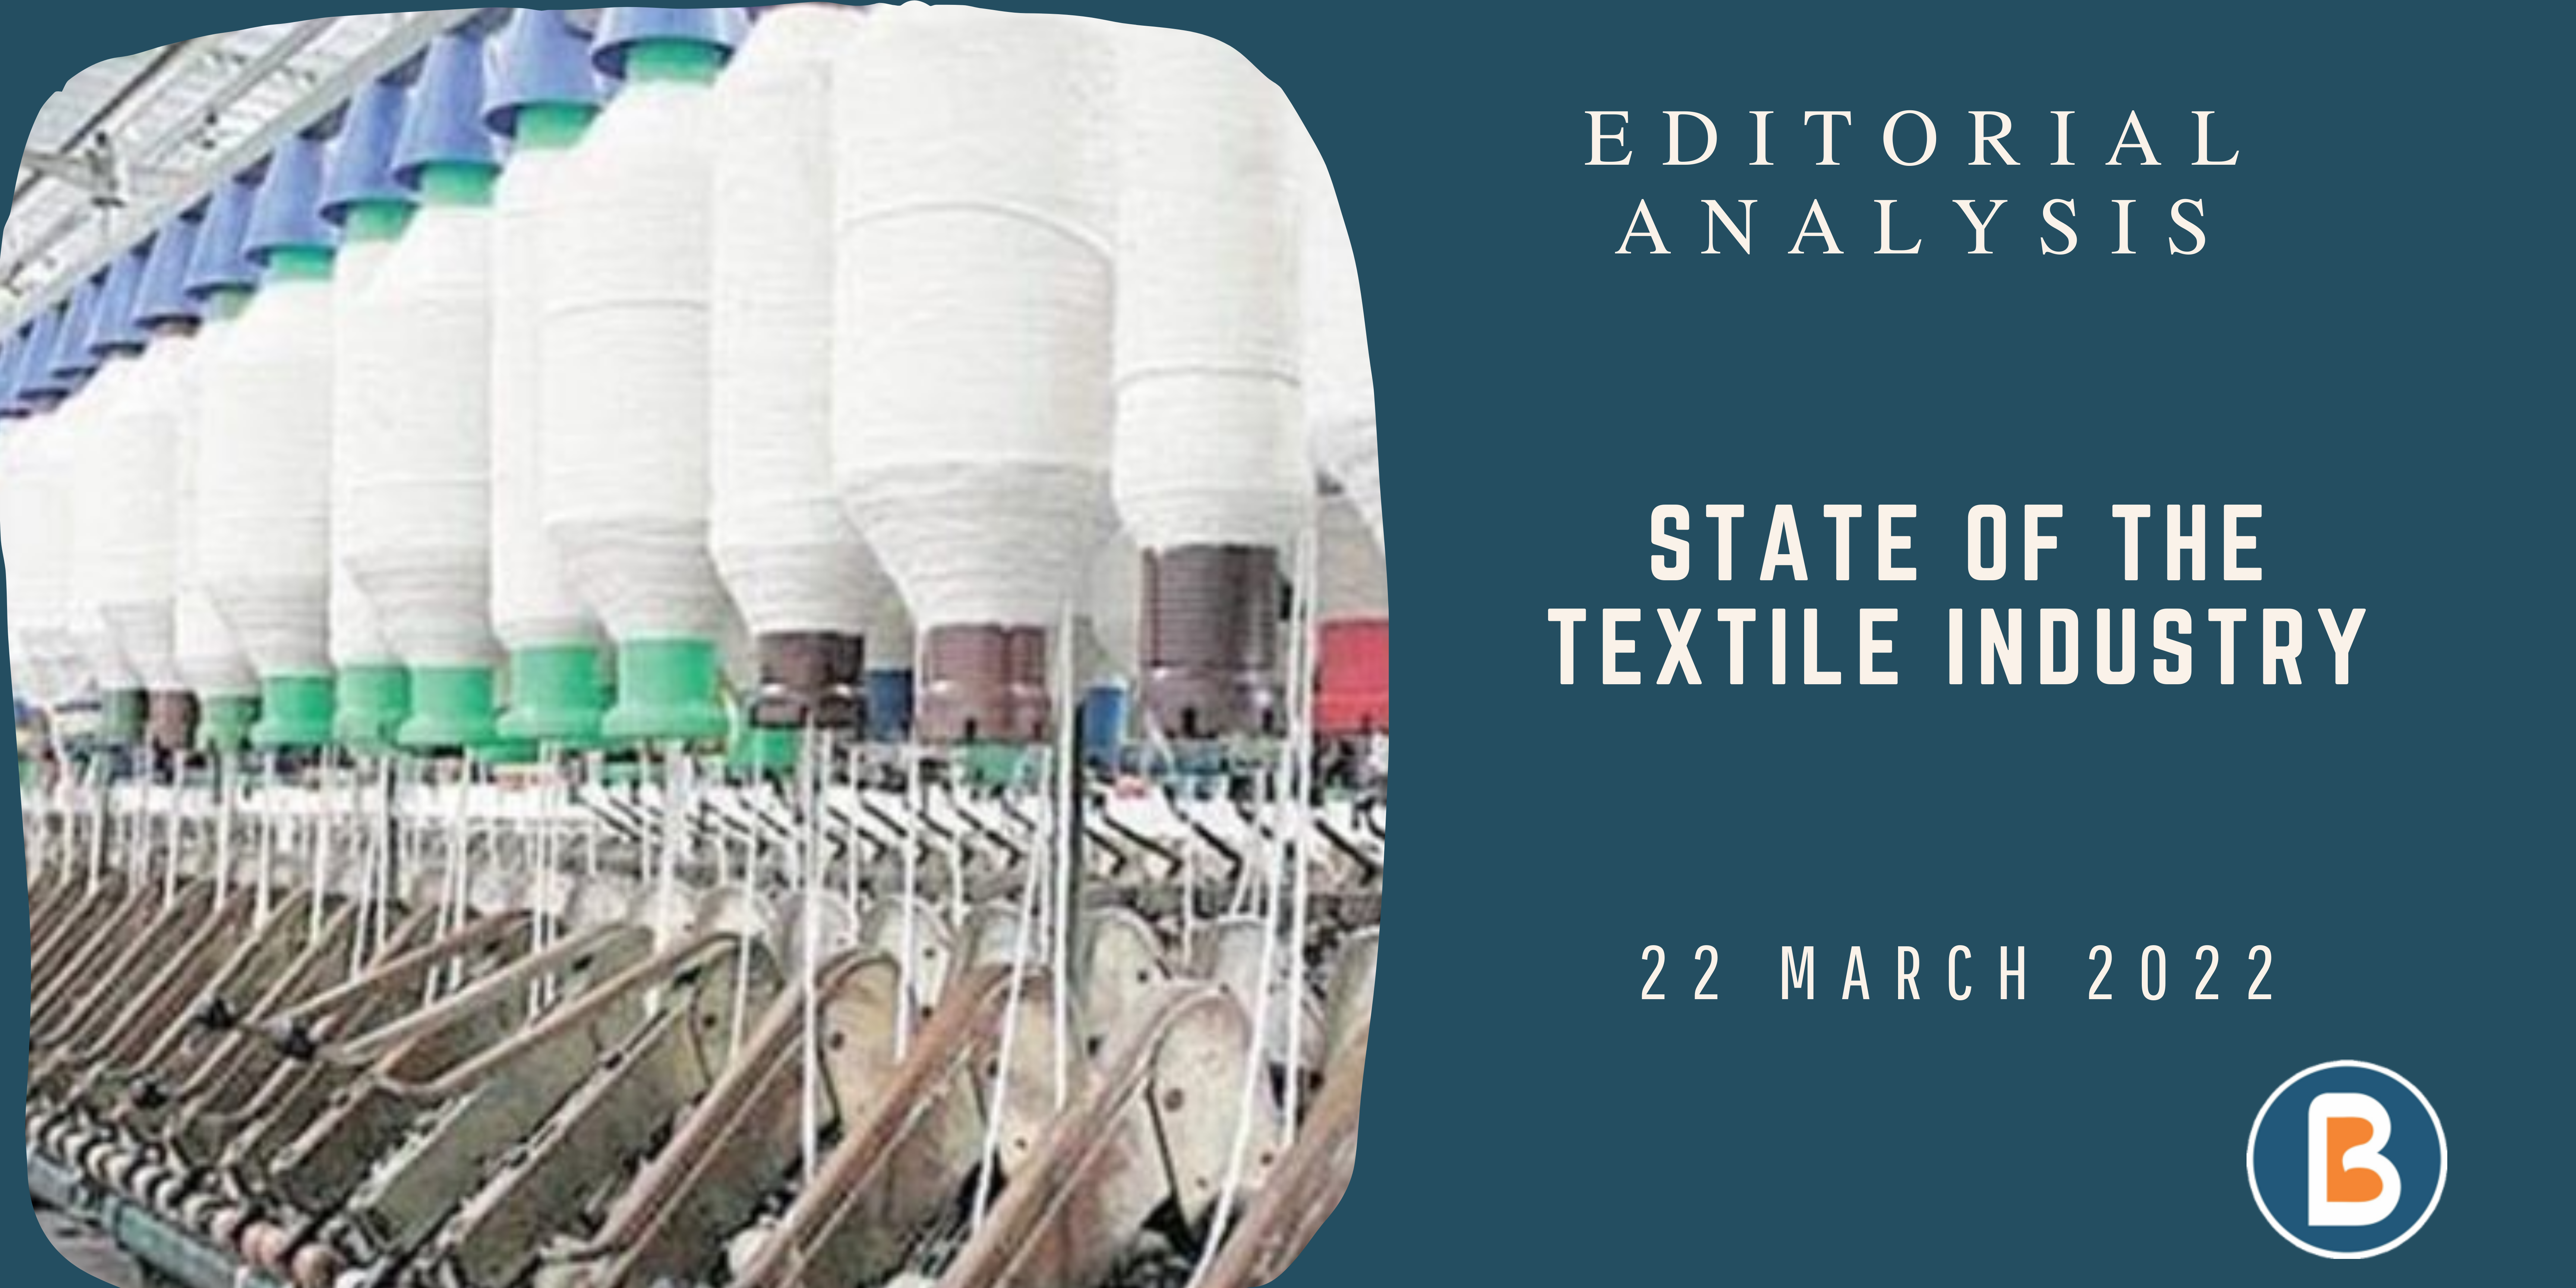 Editorial Analysis for IAS - State of the Textile Industry